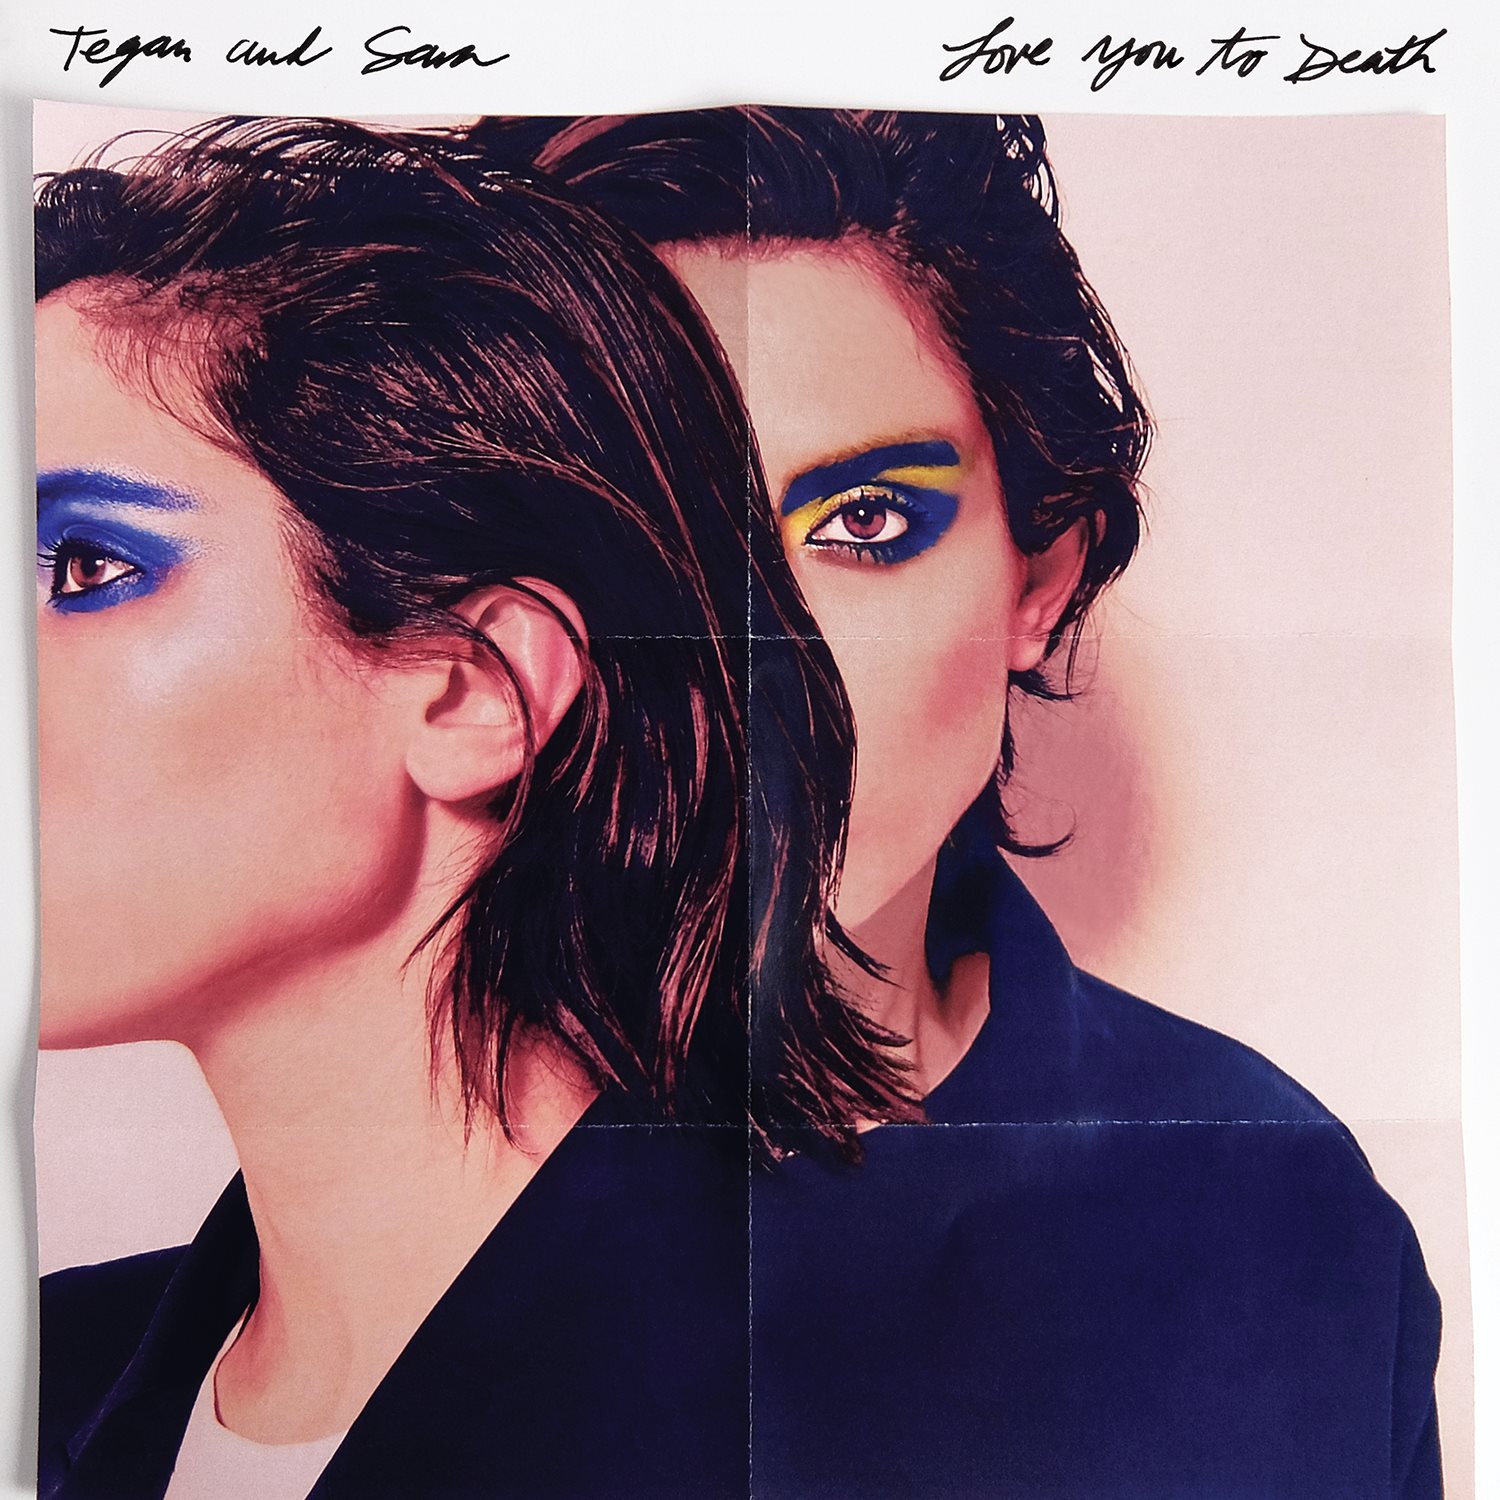 Tegan and Sara Share Teaser Clips for 'Boyfriend,' the First Single From 'Love You to Death'